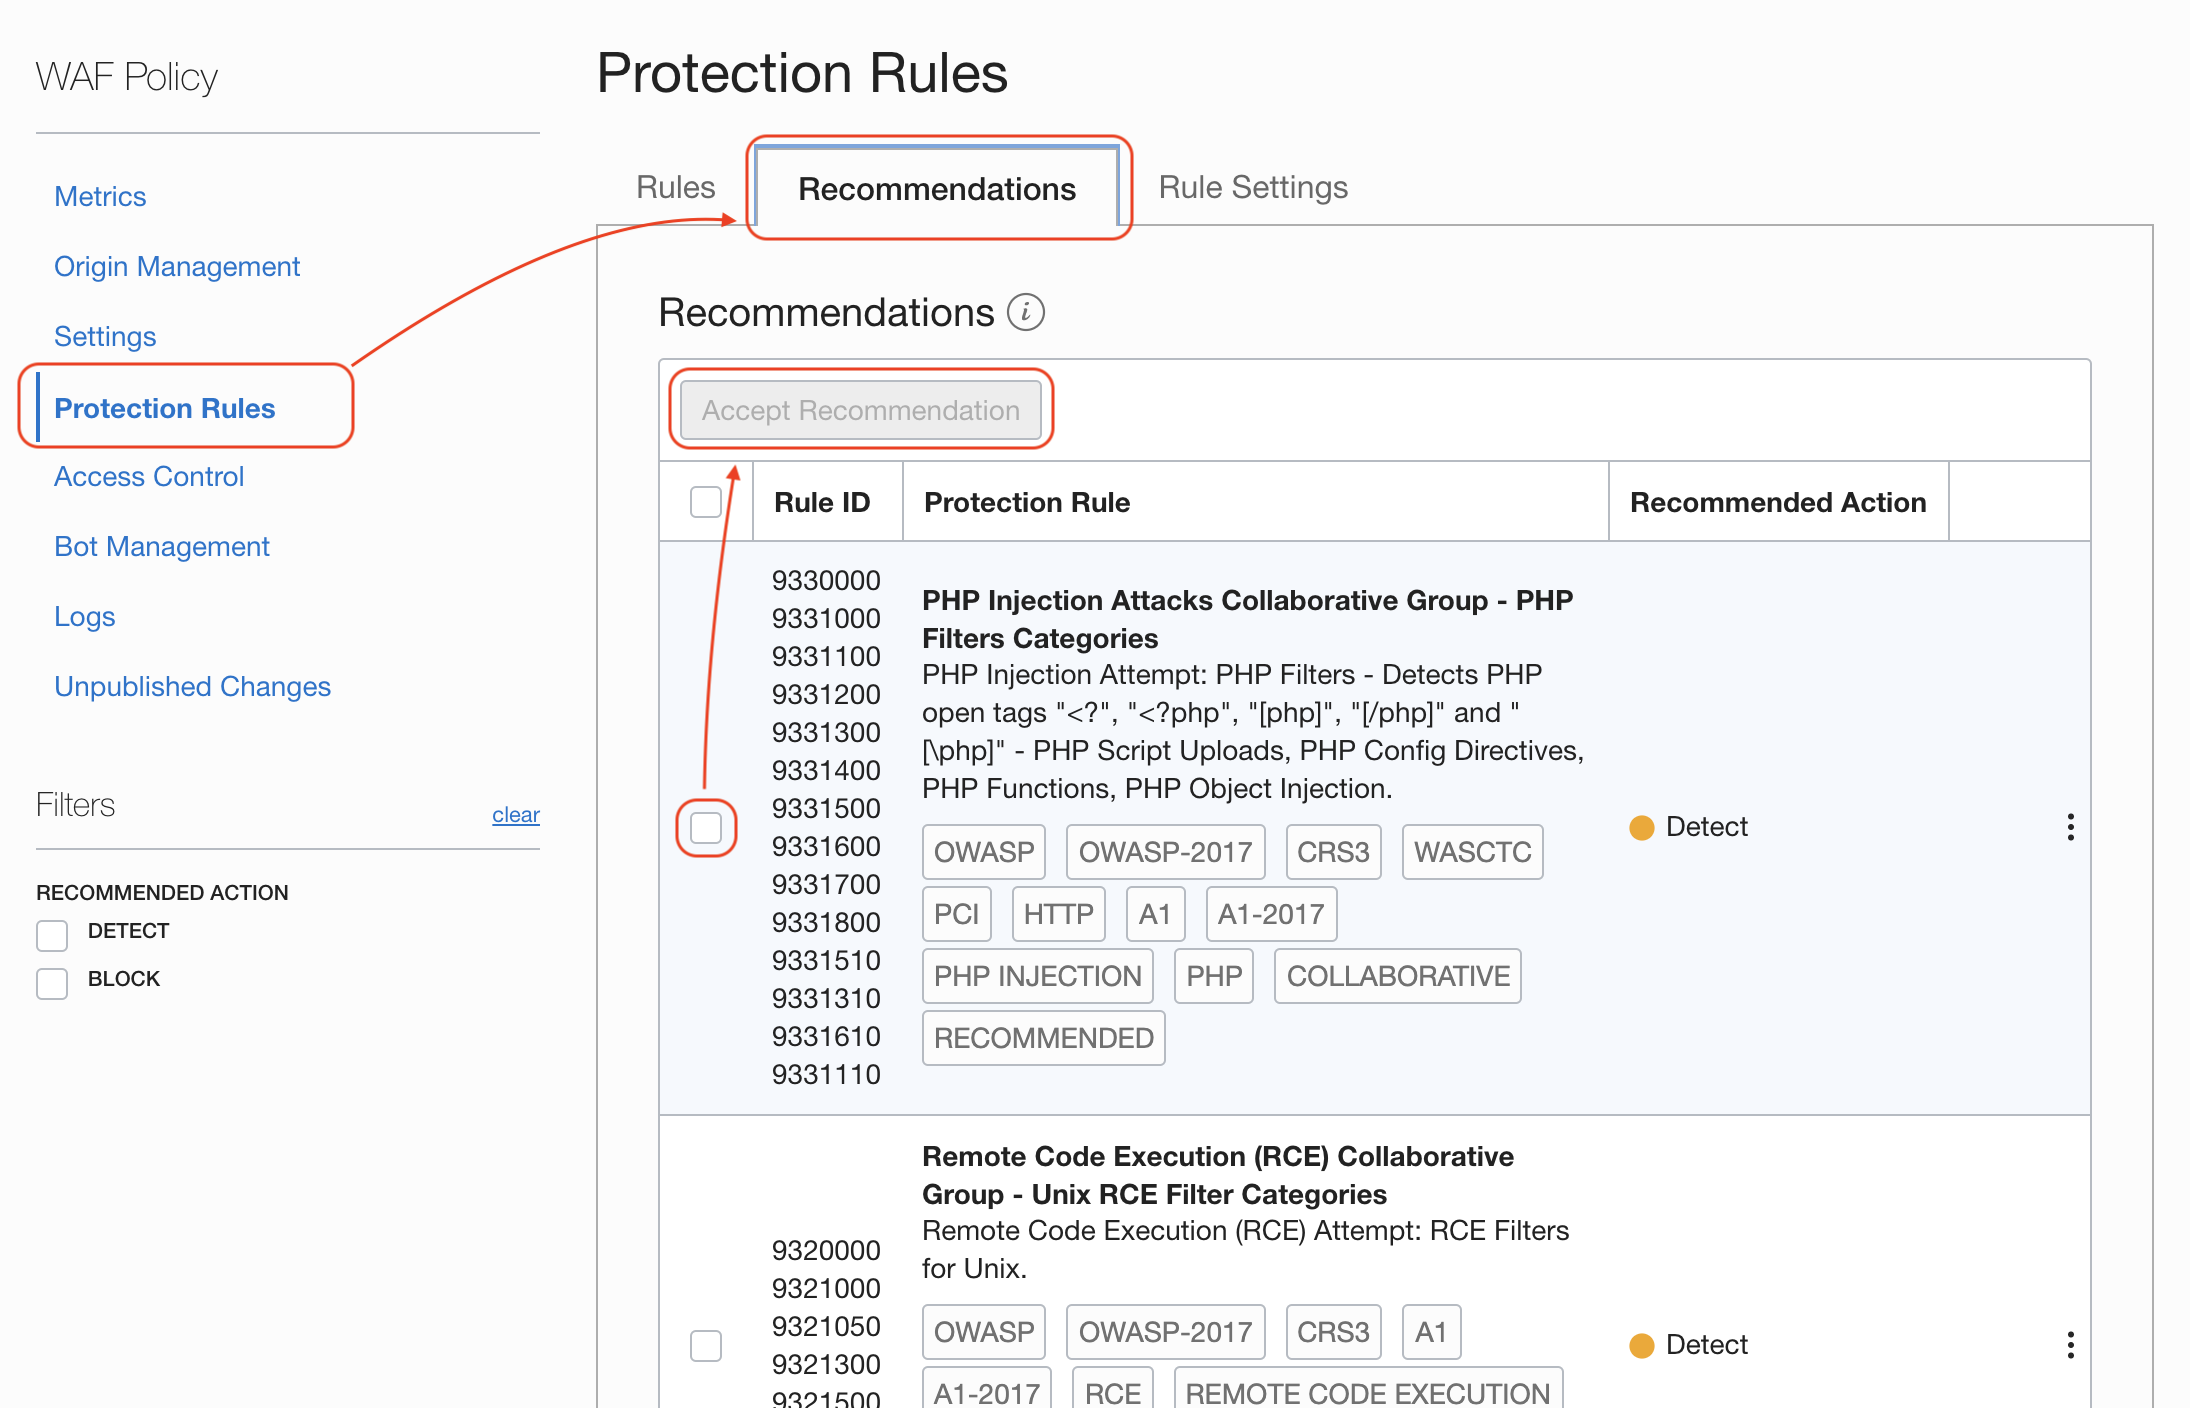 Protection Rules Recommendations